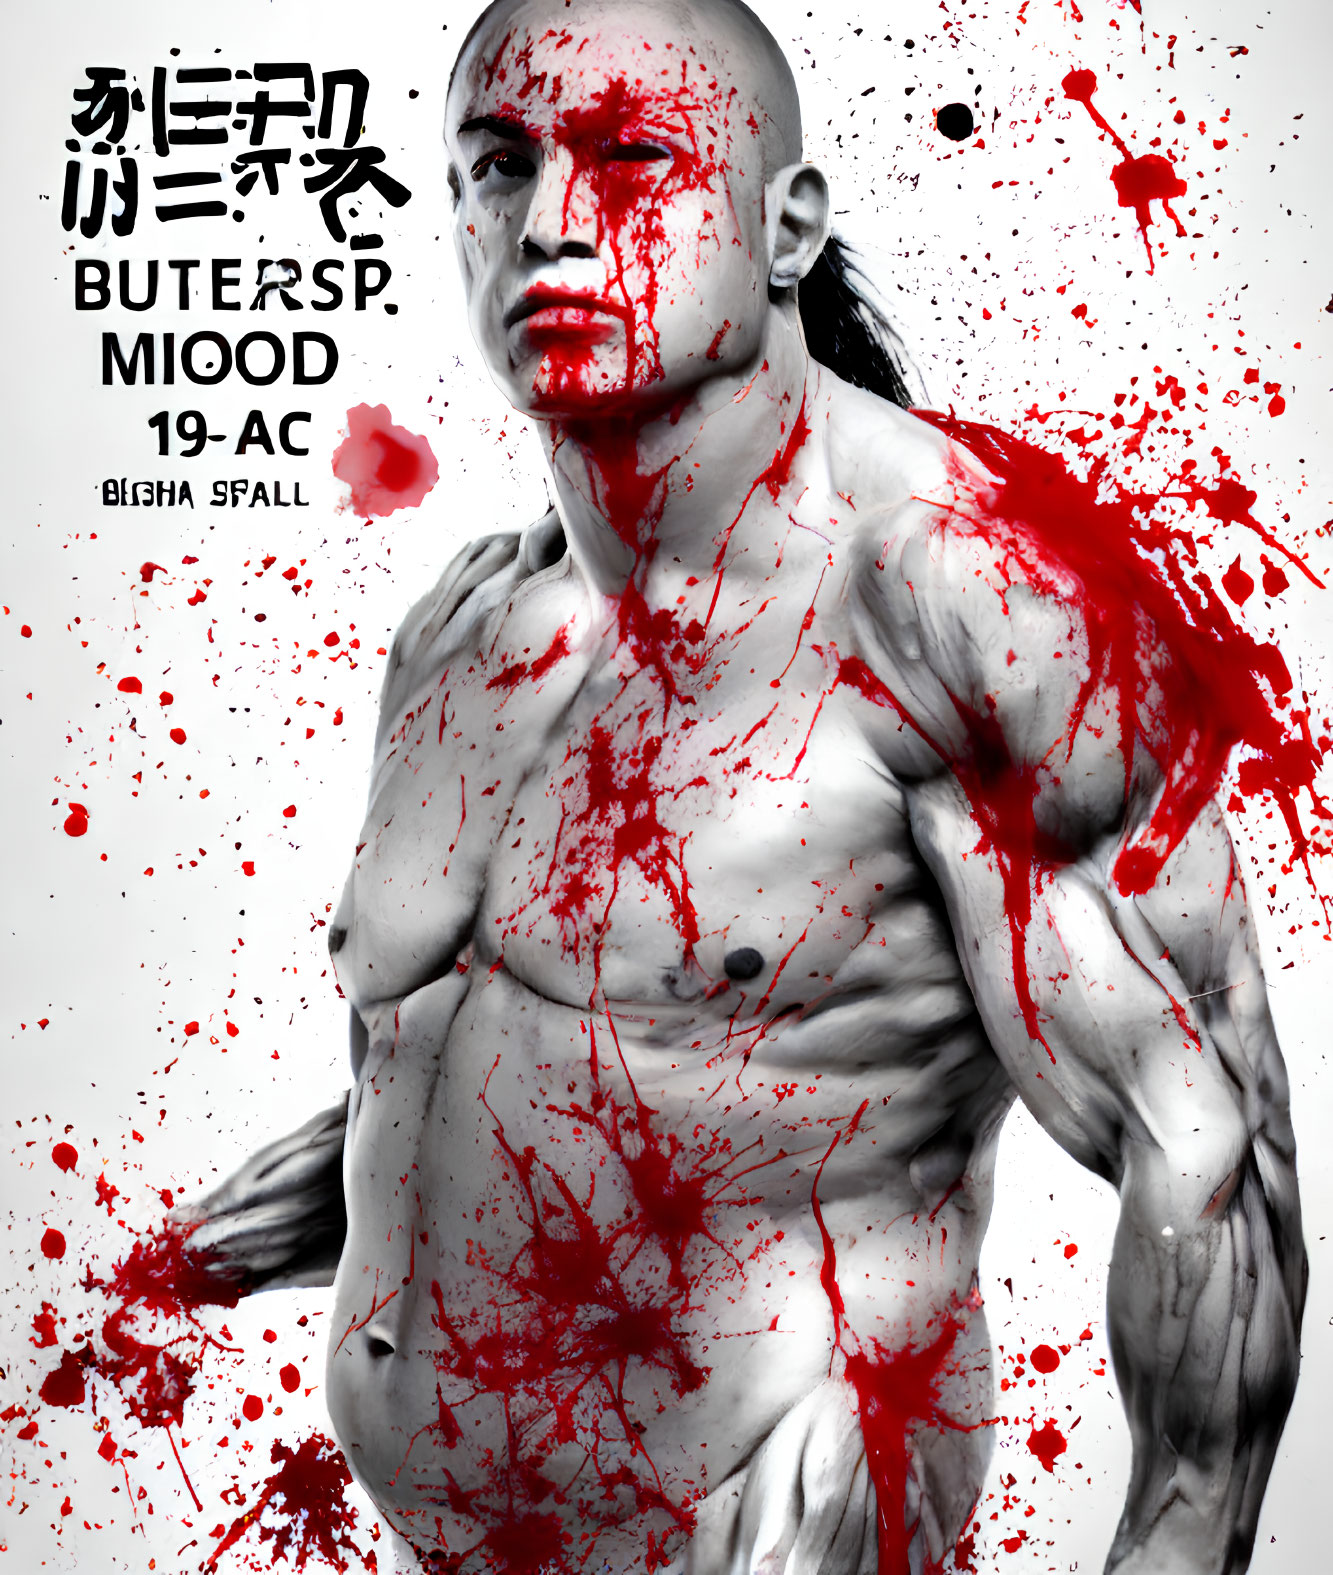 Shirtless muscular figure splattered in red paint with non-English text